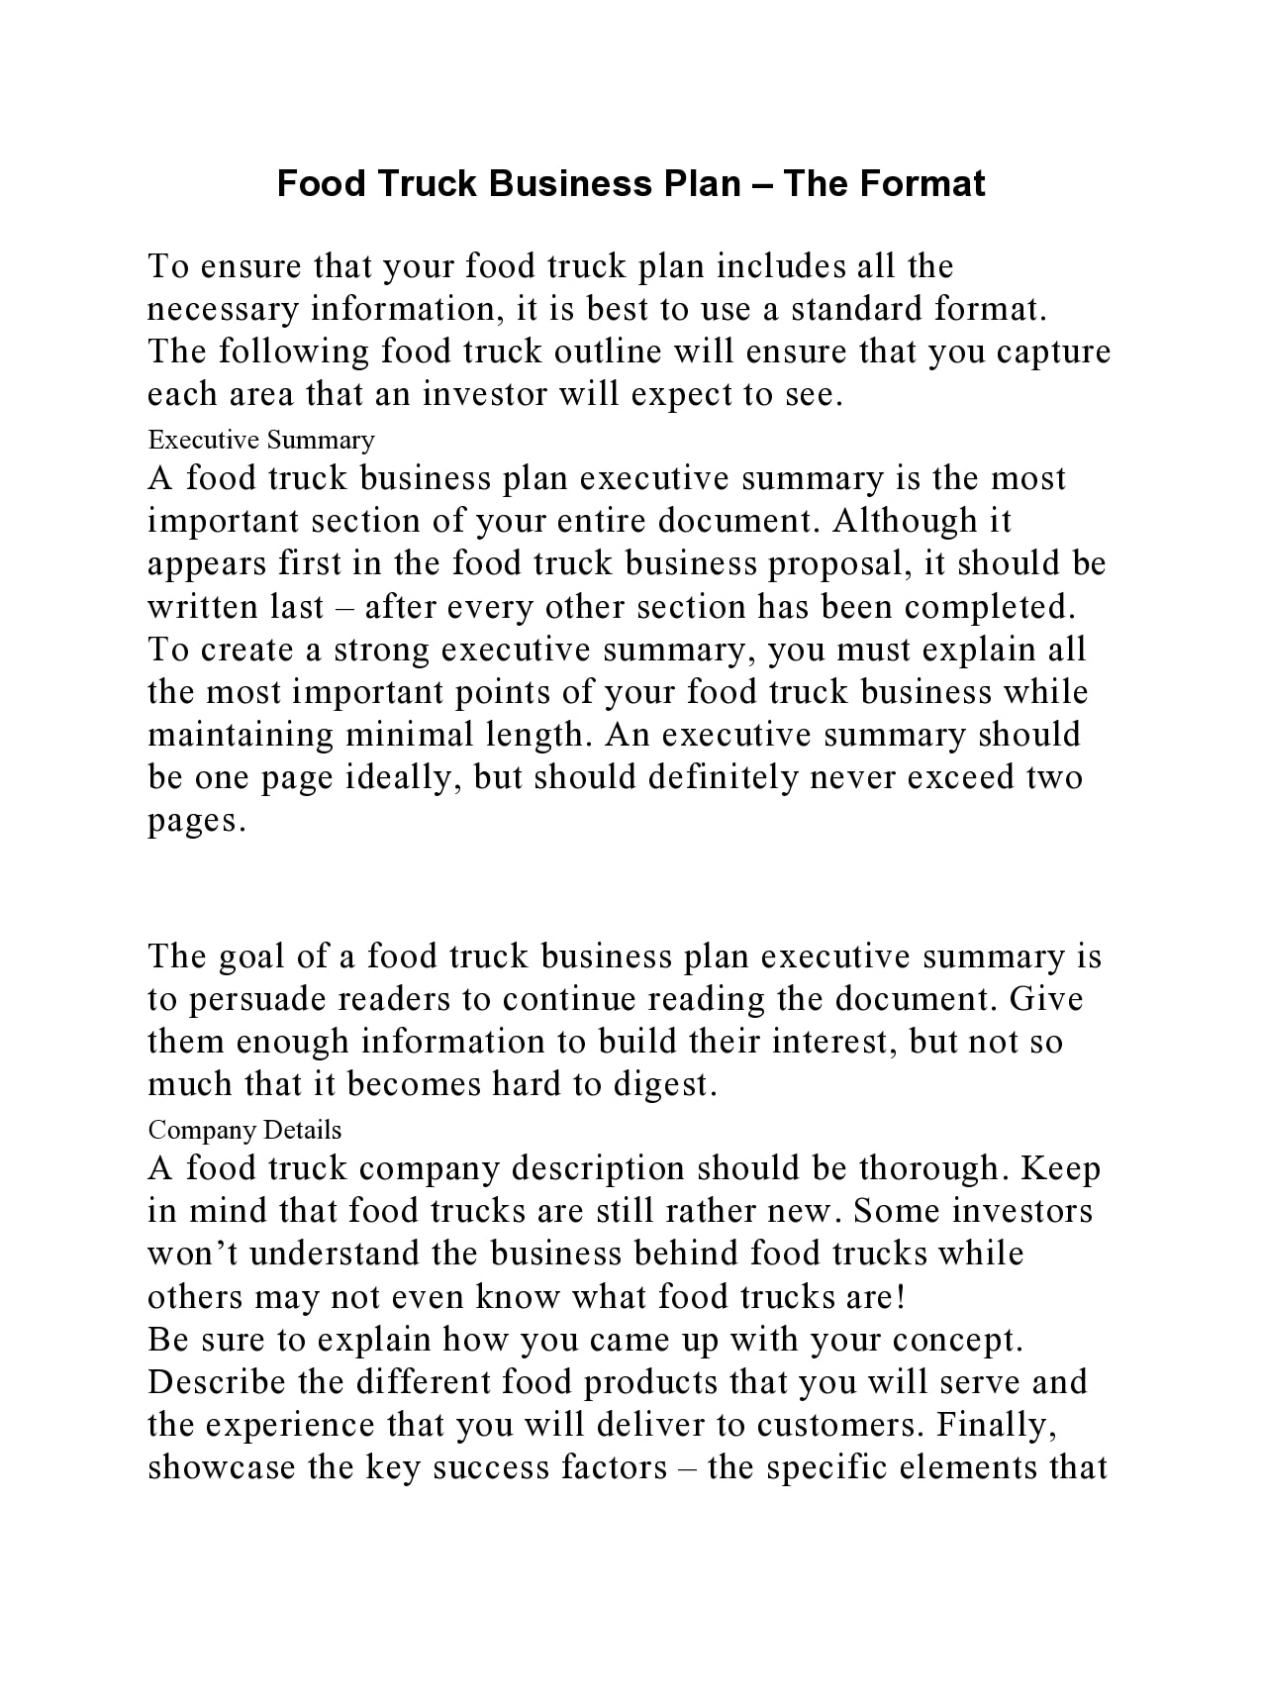 29 Proven Food Truck Business Plans (Pdf, Word) - Templatearchive In Business Plan Template Food Truck